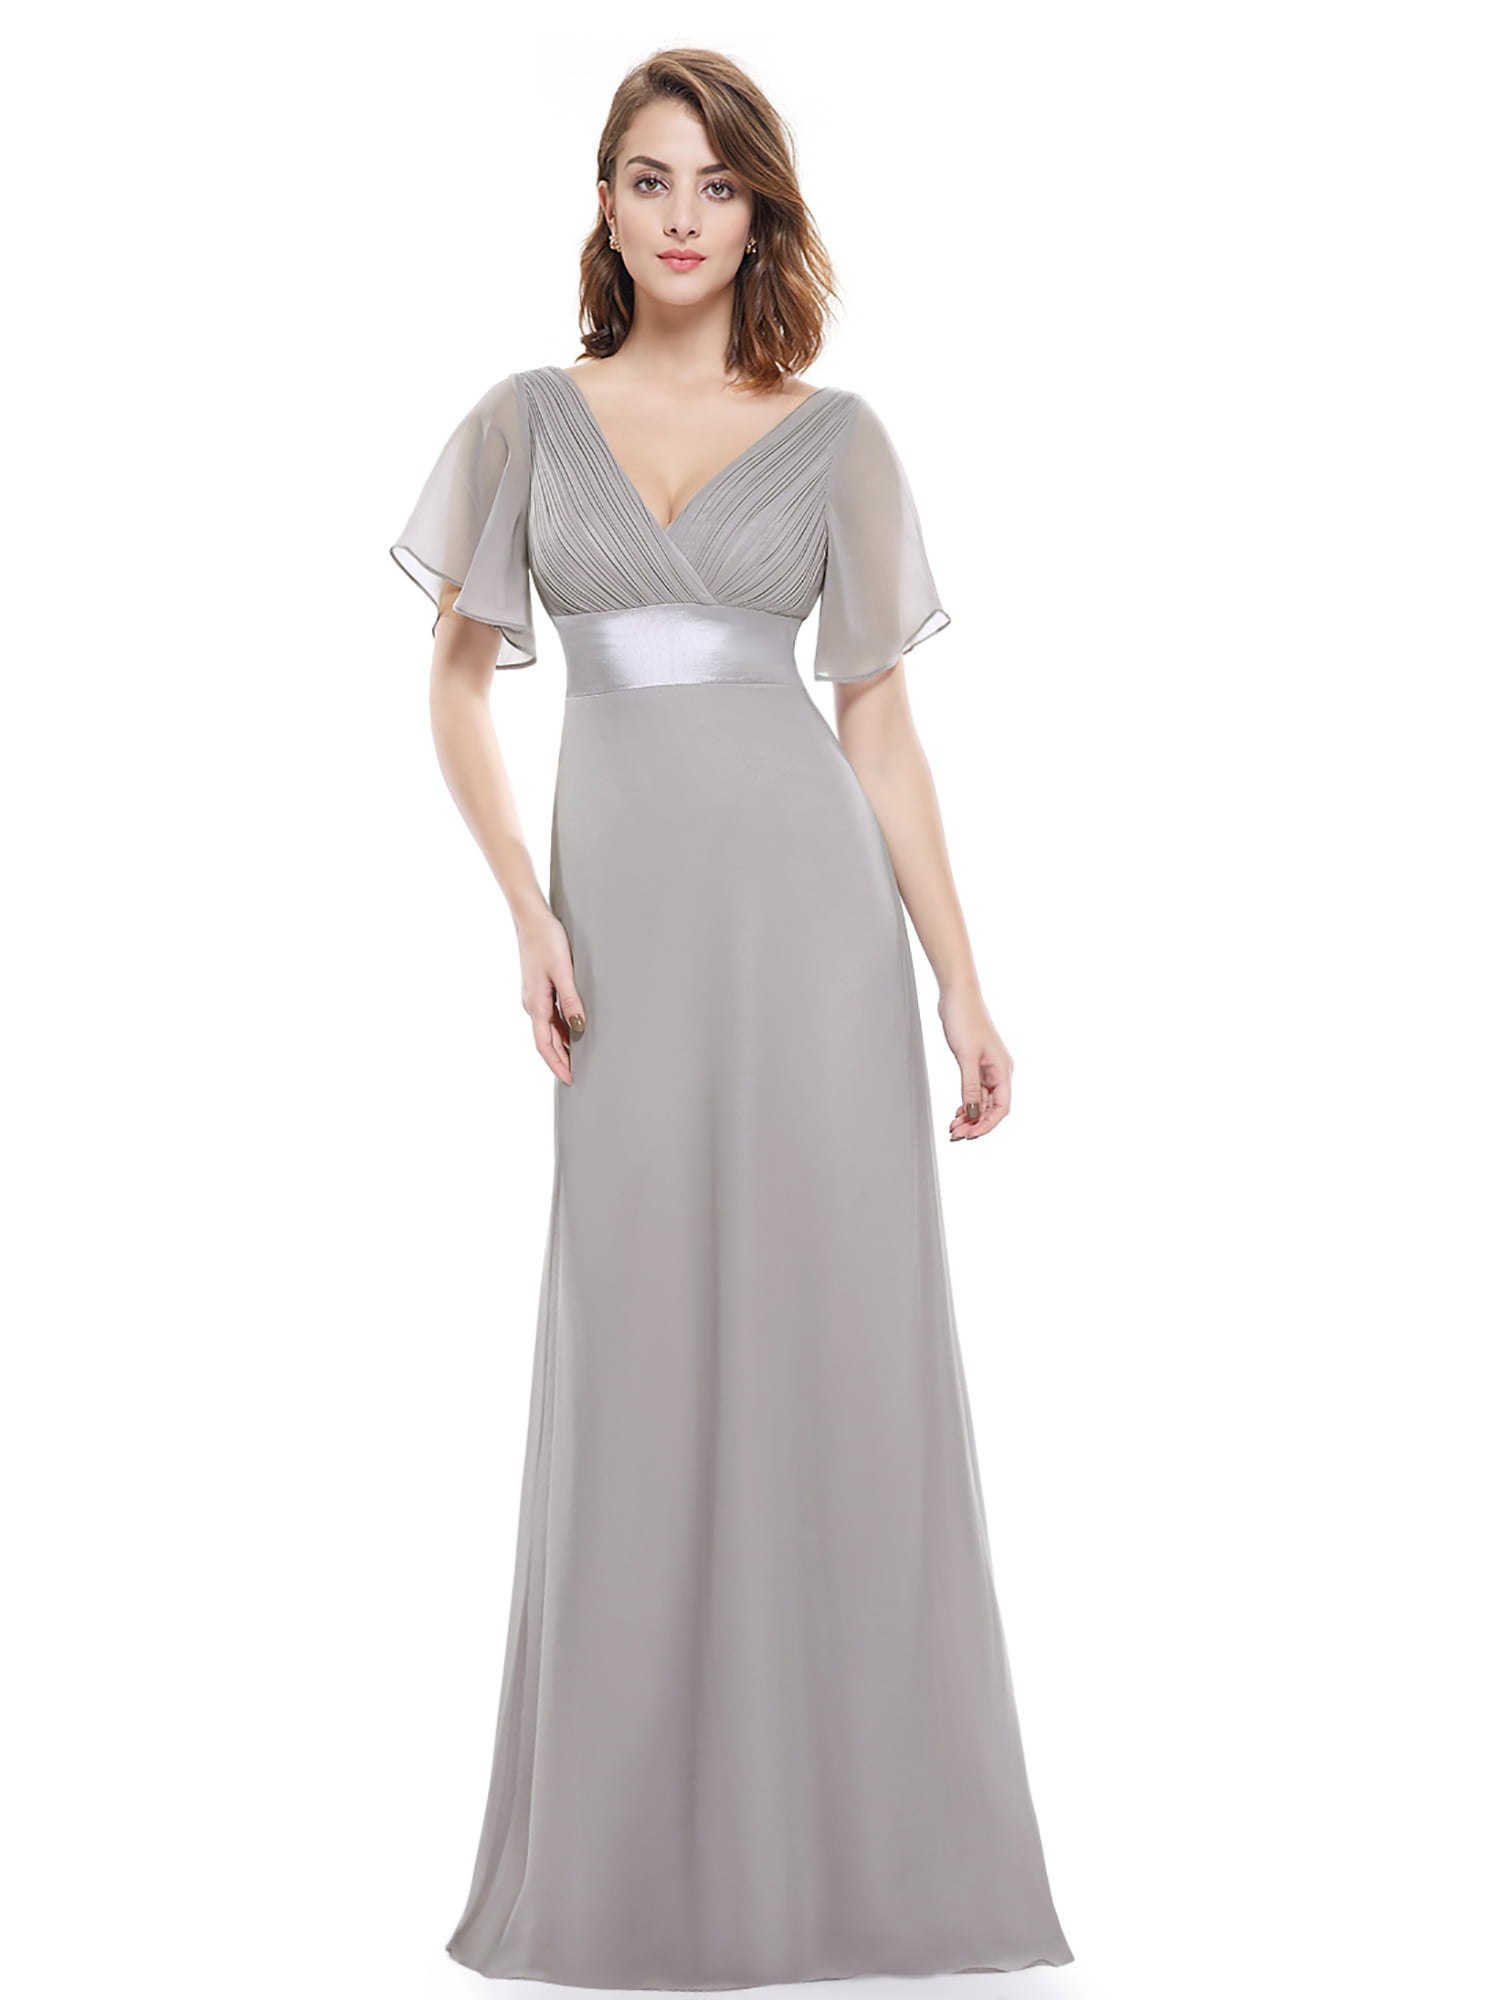 grey mother of the groom dresses plus size